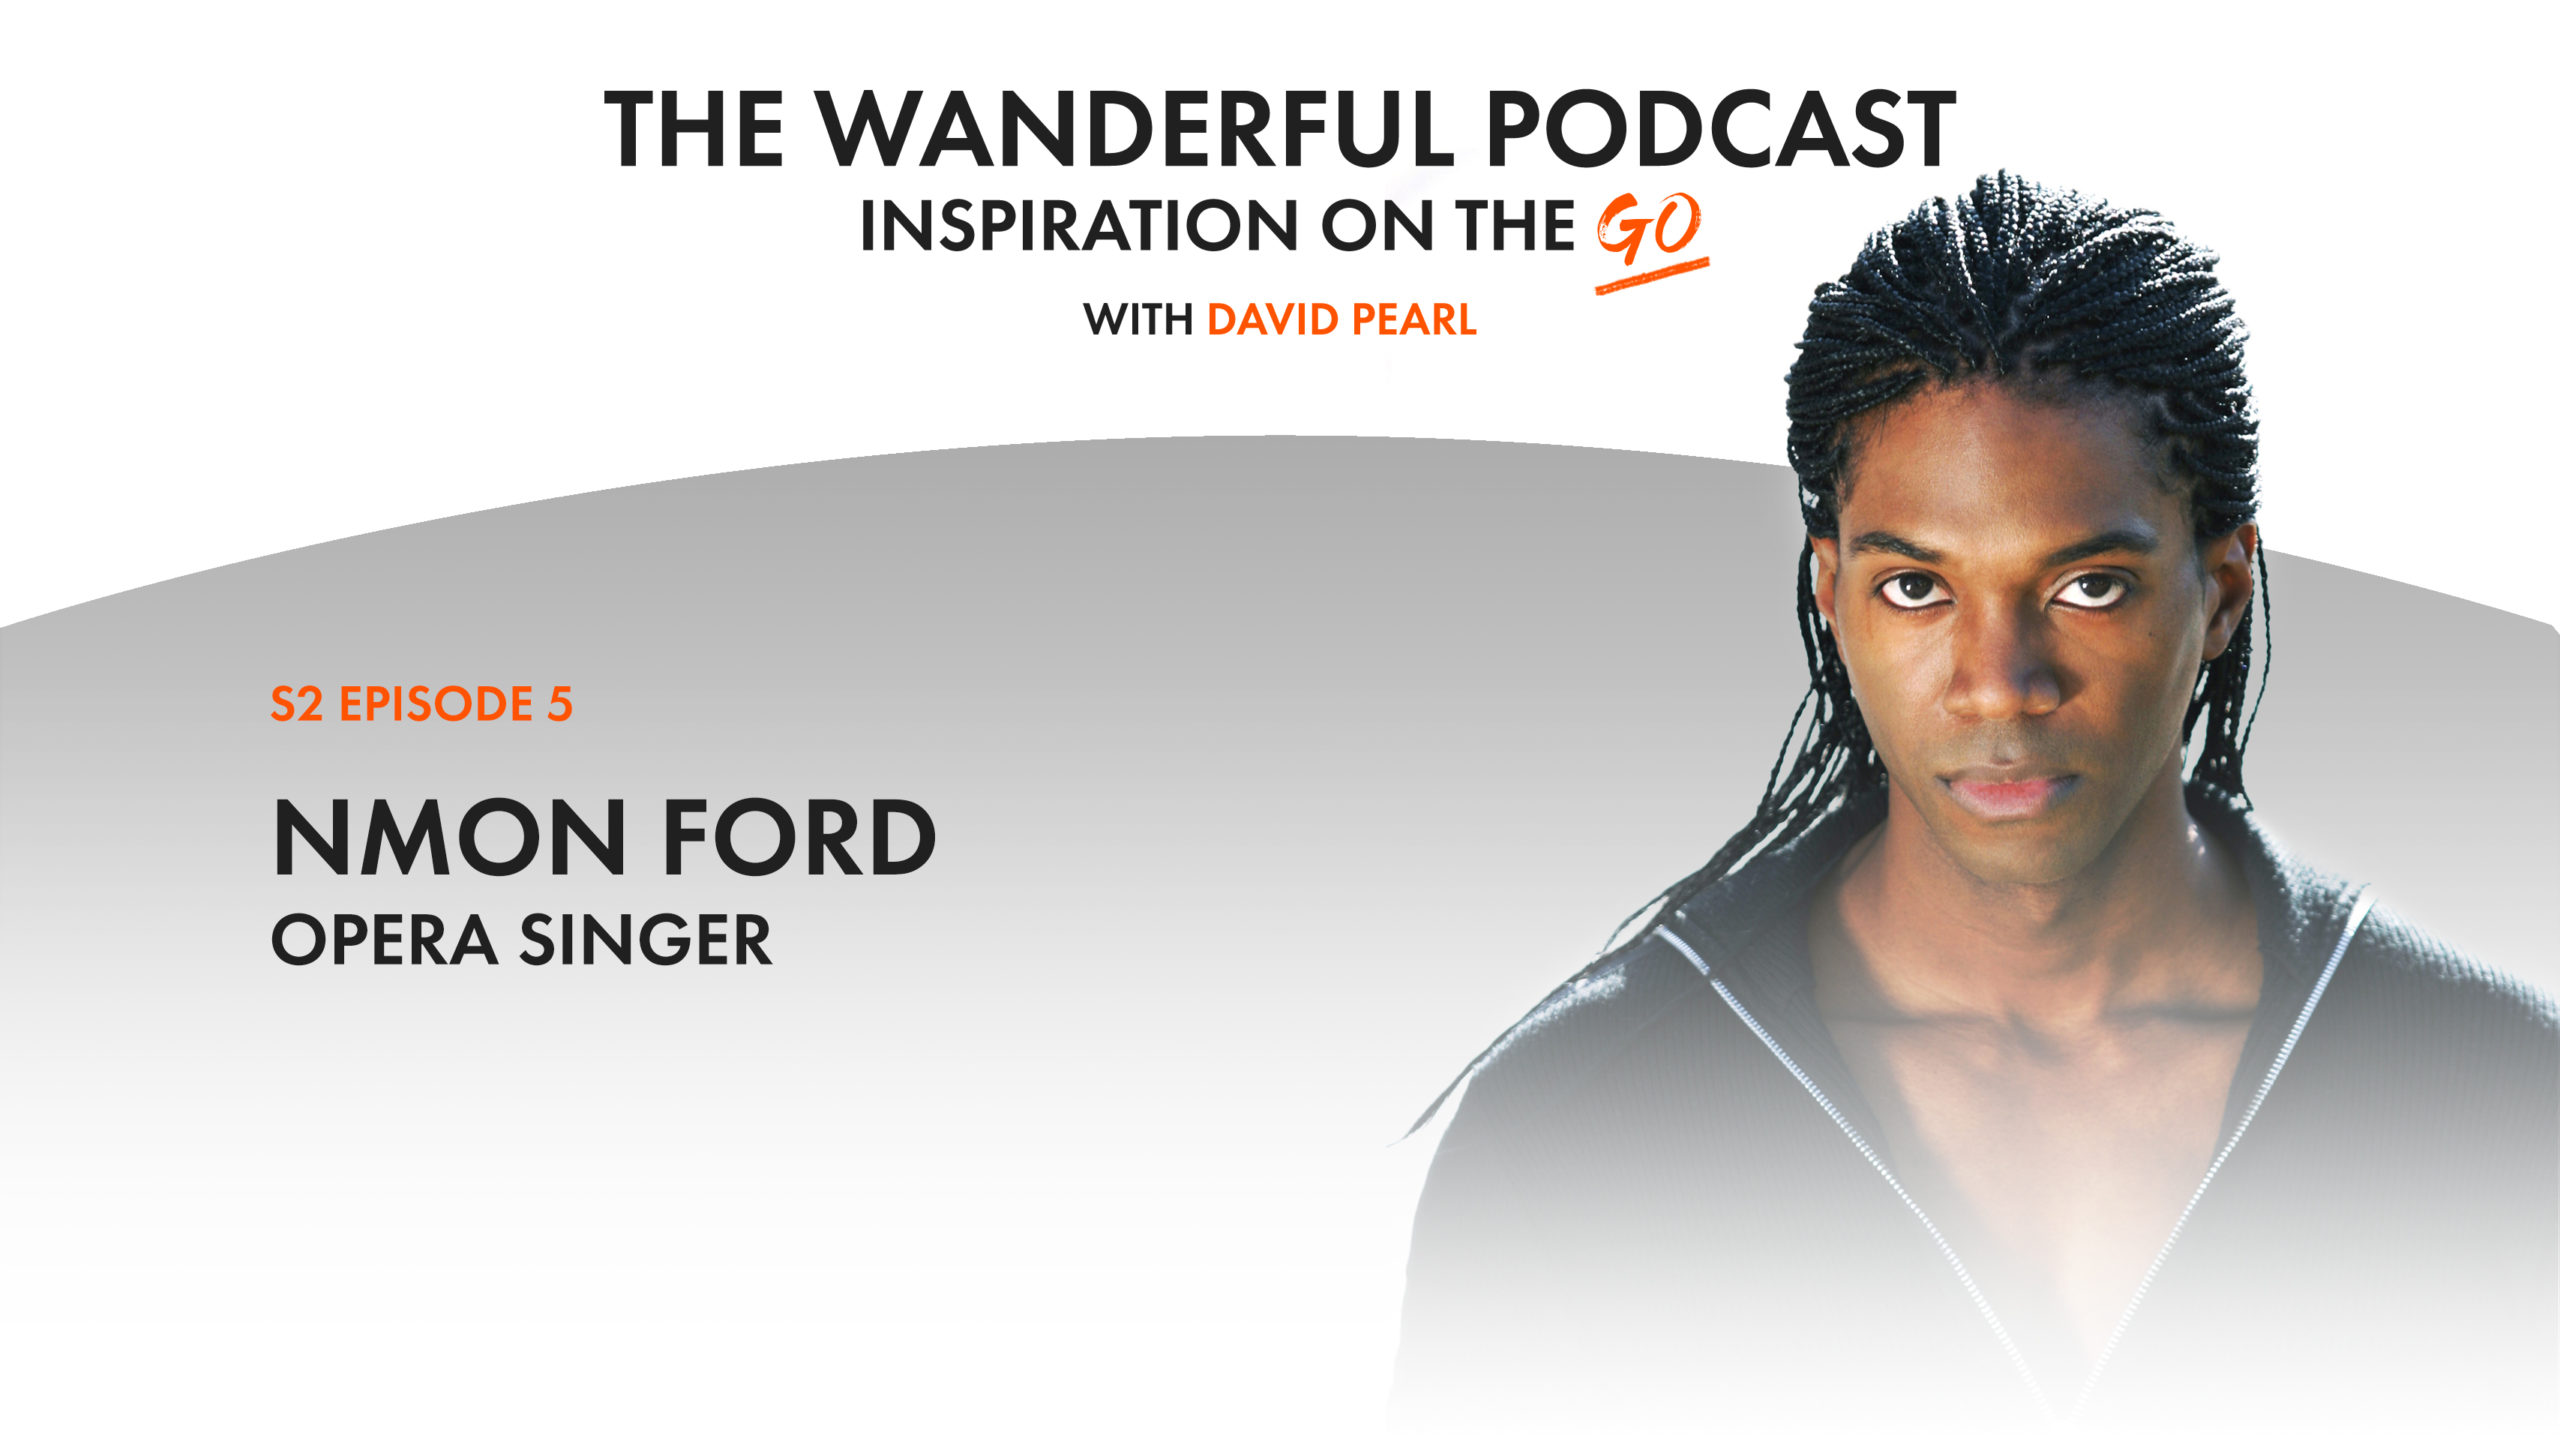 Nmon Ford: The Wanderful Podcast with David Pearl